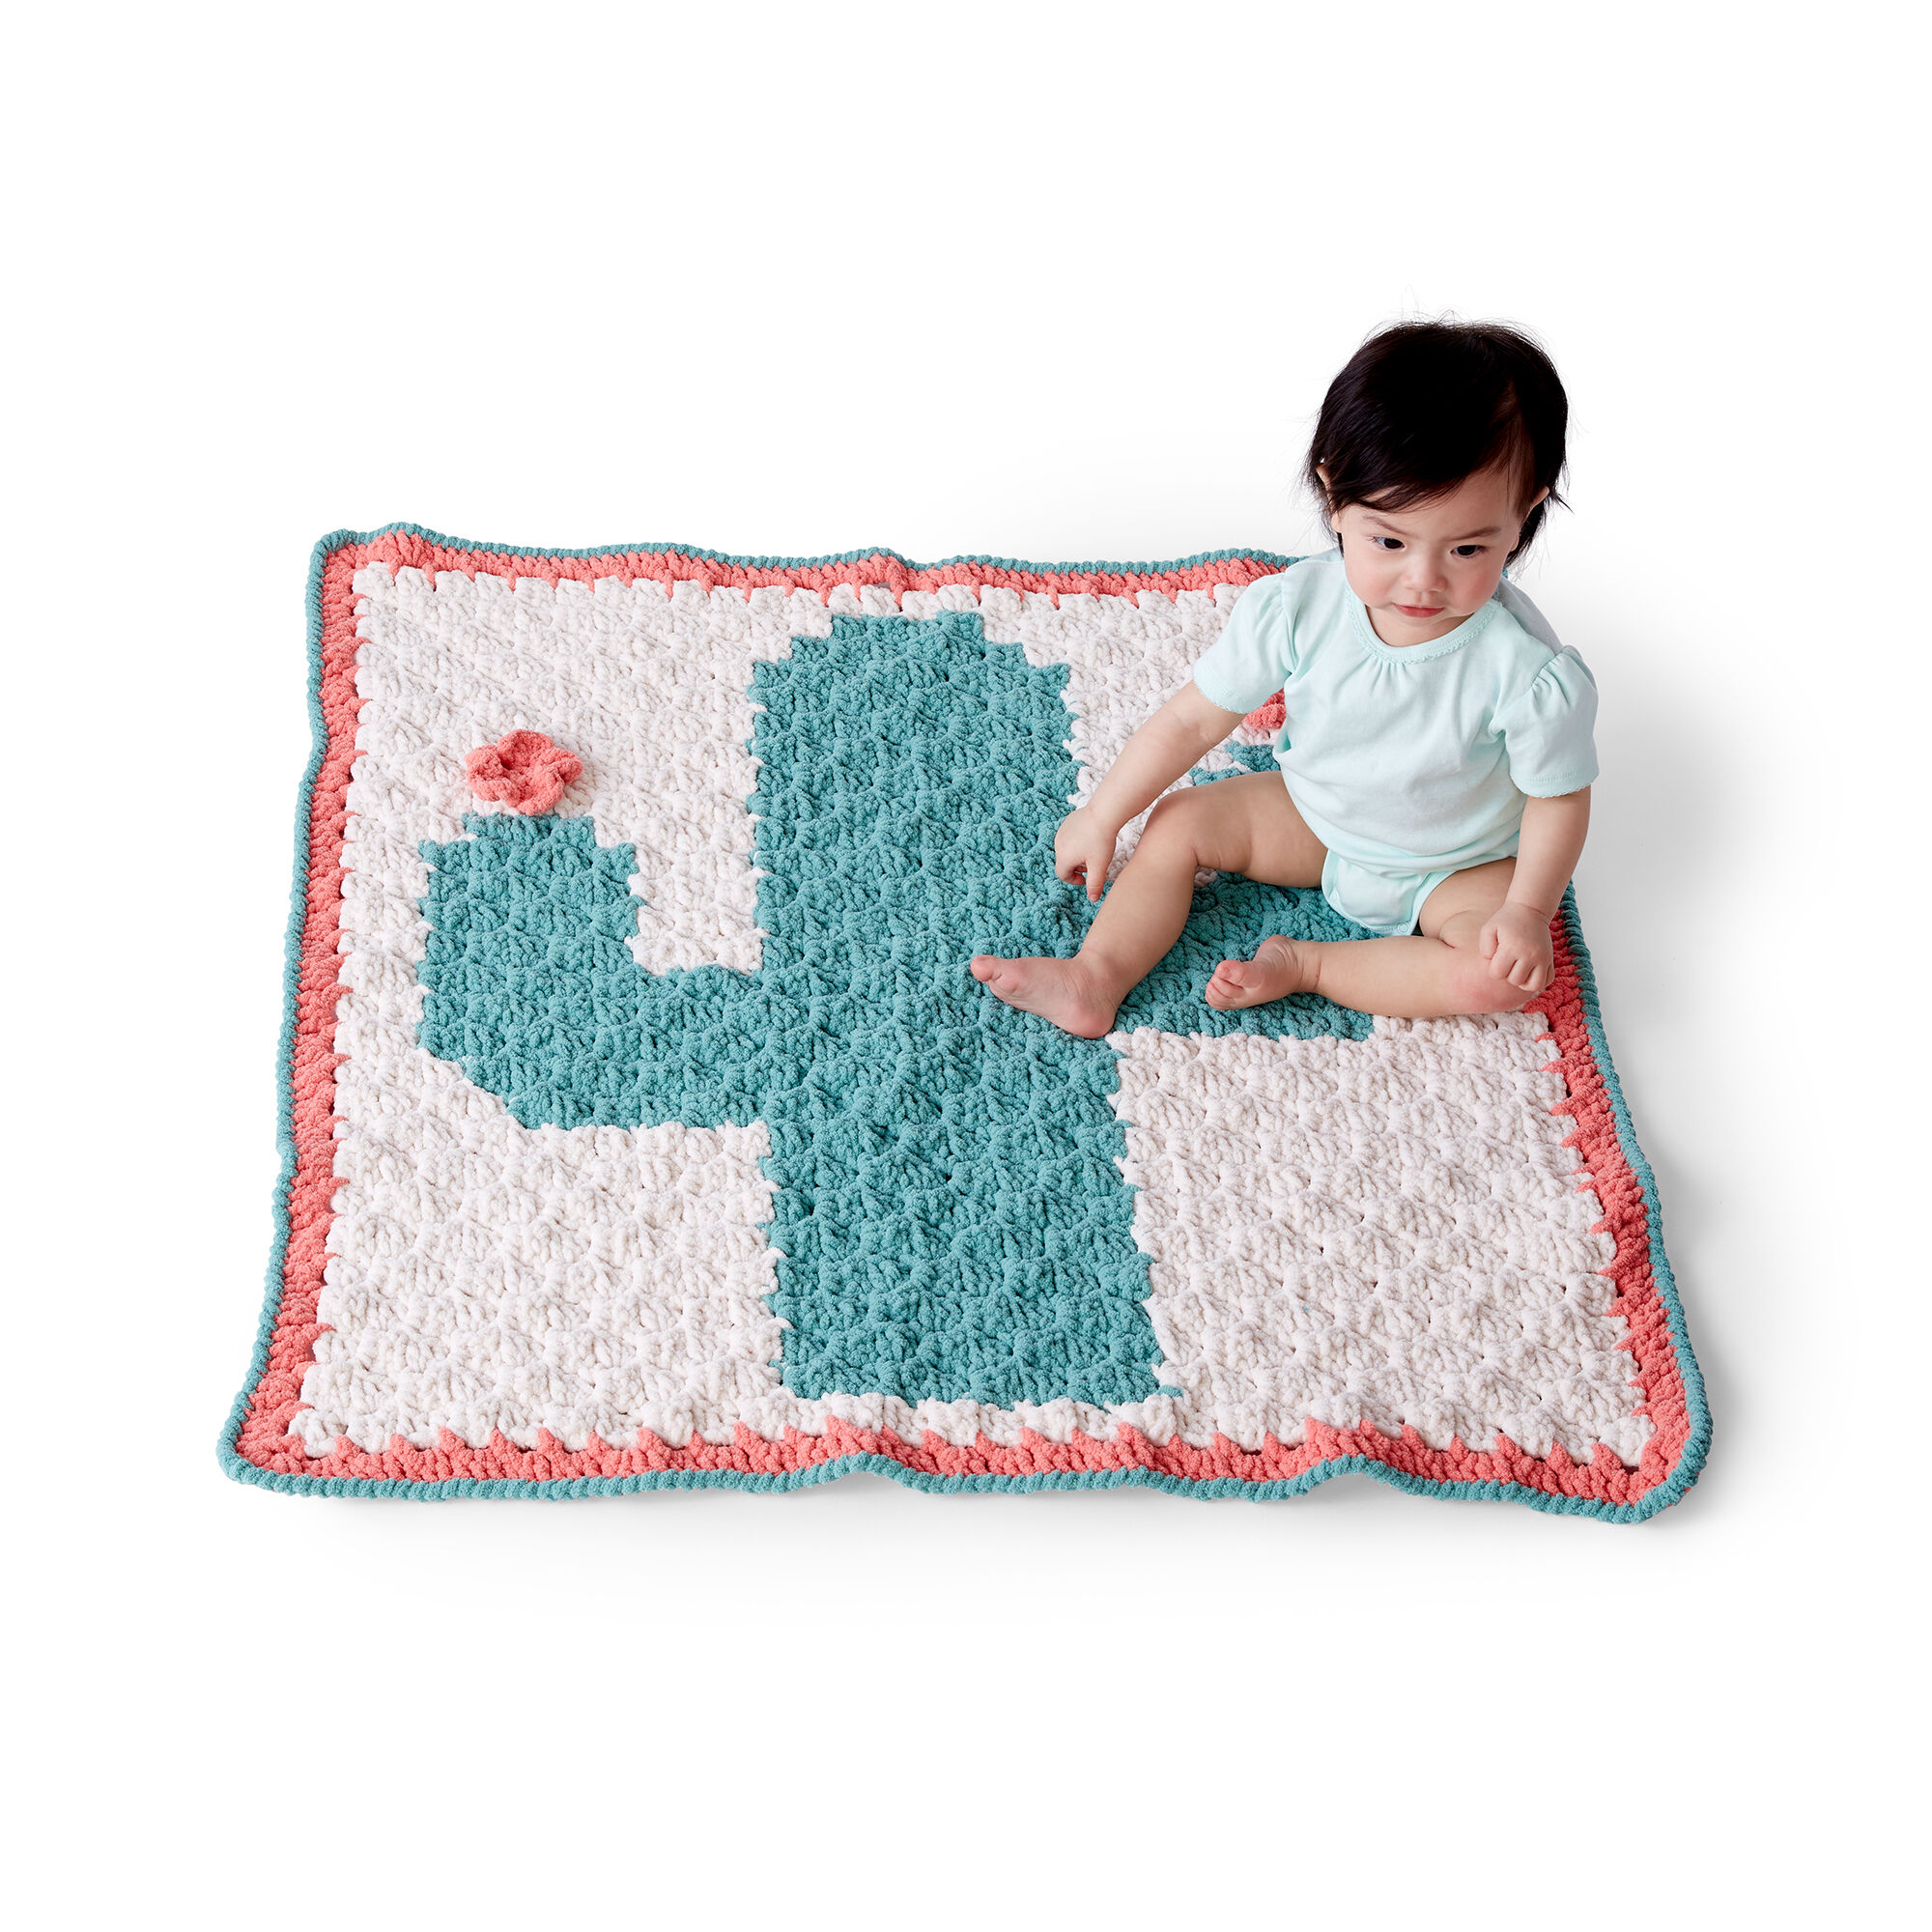 Bernat C2C Crochet Cactus Blanket - If you’re looking to learn a new crochet skill, check out these 12 corner to corner crochet patterns. #cornertocornercrochetpatterns #C2Ccrochetpatterns #crochetpatterns